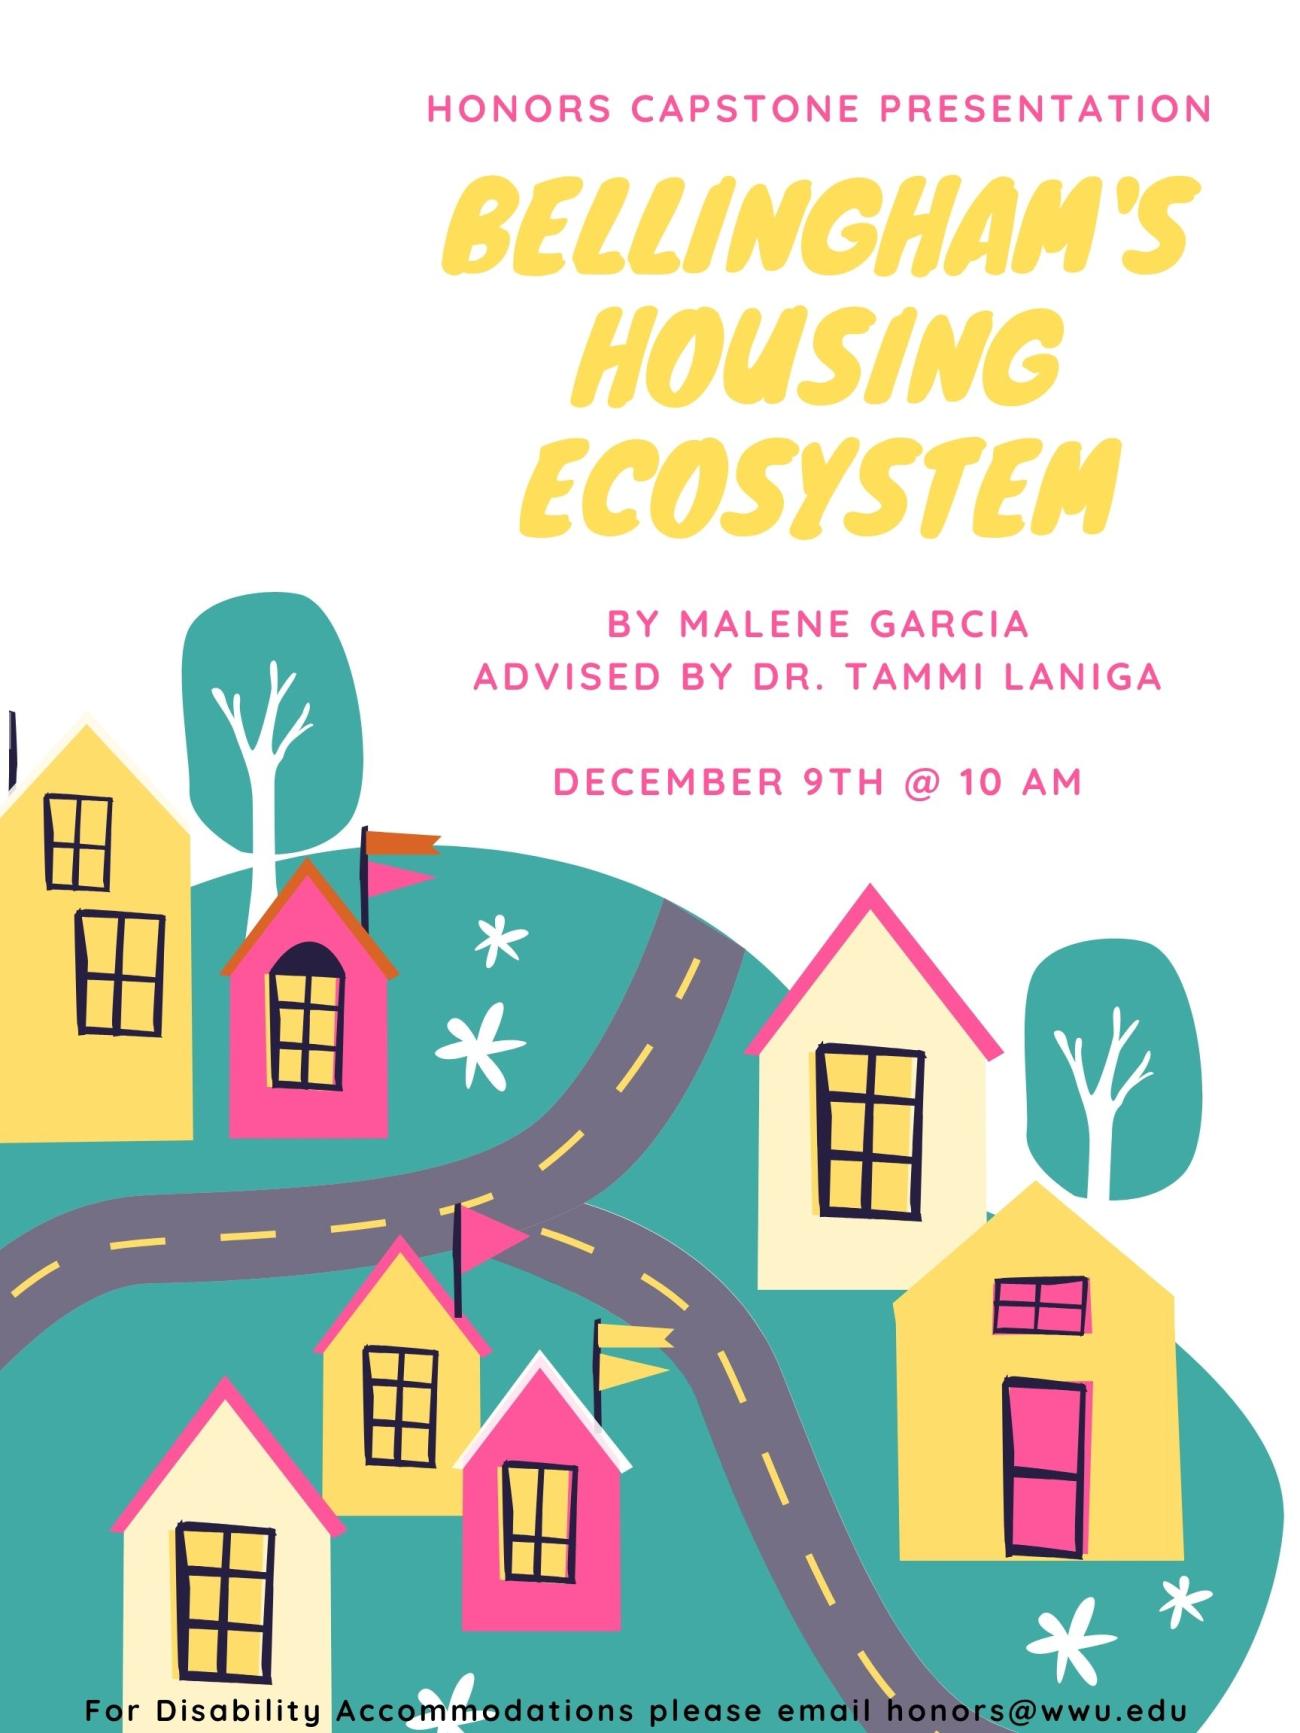 A poster with a neighborhood at the bottom. The text reads: "Honors capstone presentation. Bellingham's Housing Ecosystem. By Malene Garcia, Advised by Dr. Tammi Laninga. December 9th at 10 am. For disability accommodations, please email honors@wwu.edu"